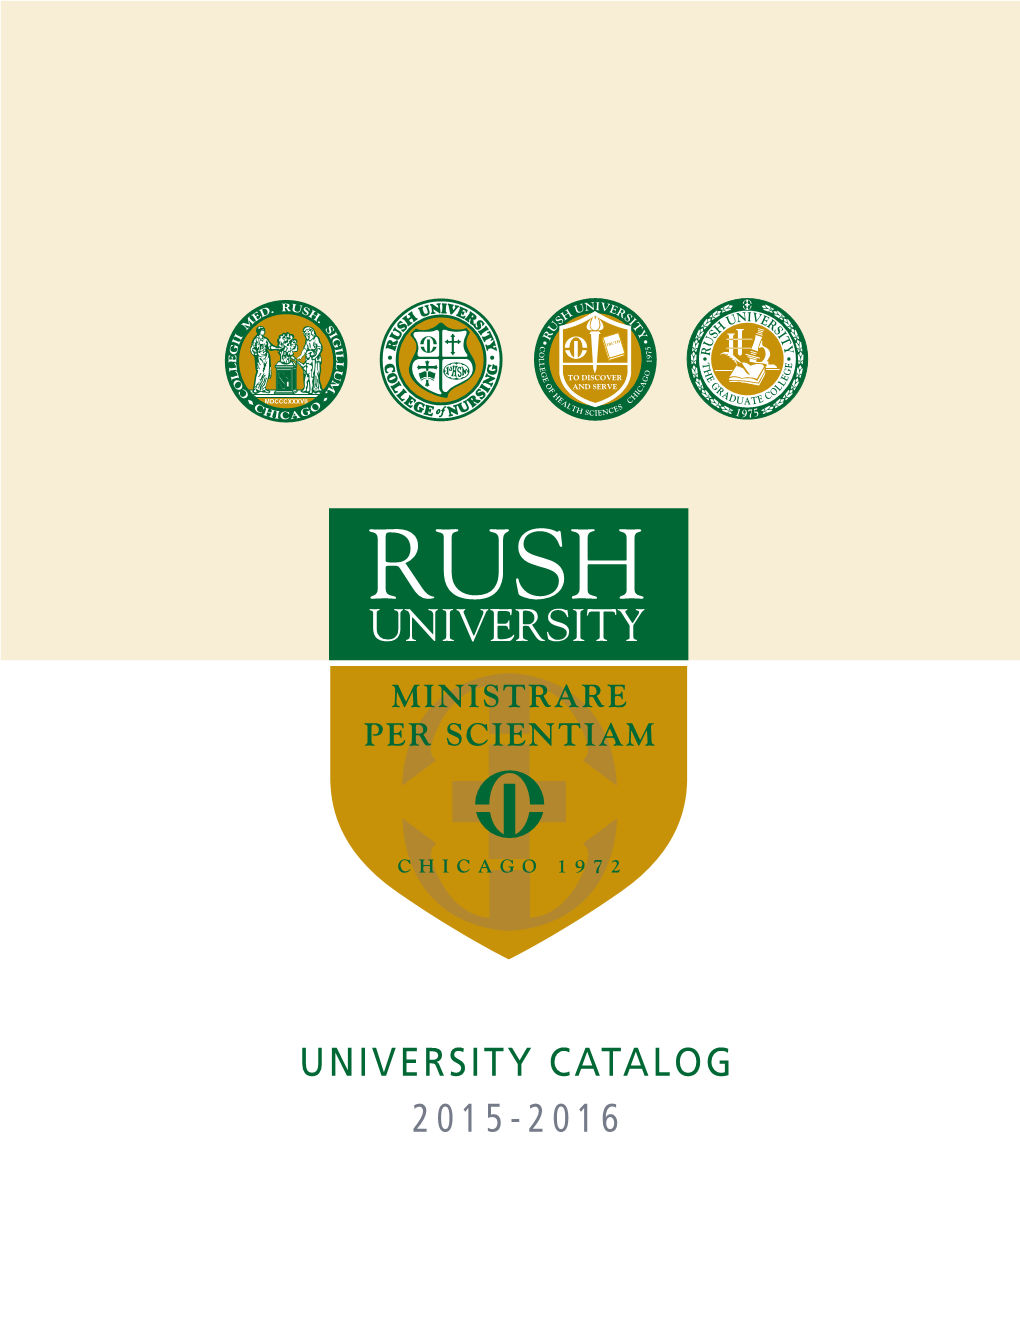 UNIVERSITY CATALOG 2015-2016 the Rush University Catalog Is Published As a Guide for the Faculty and Students of Rush University